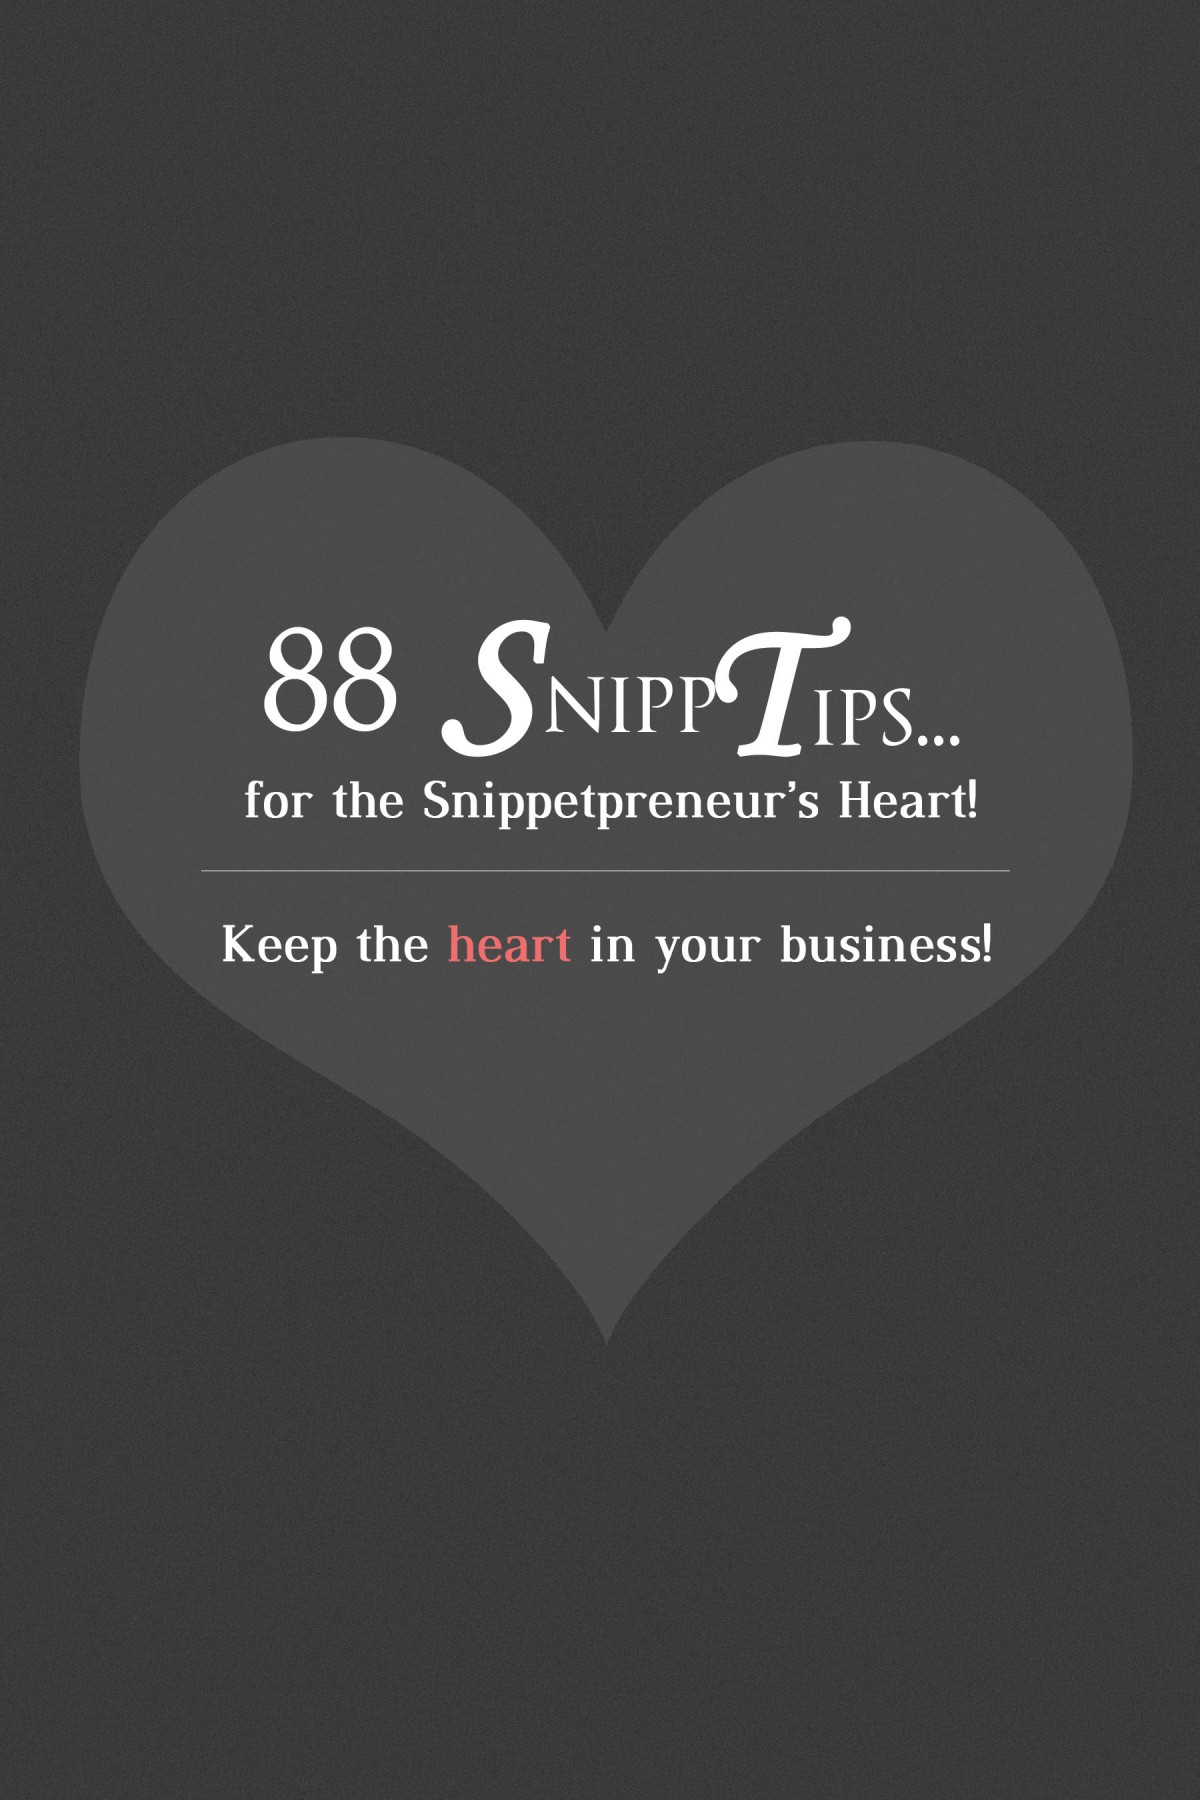 88 SnippTips for the Snippetpreneur's Heart by TR Johnson